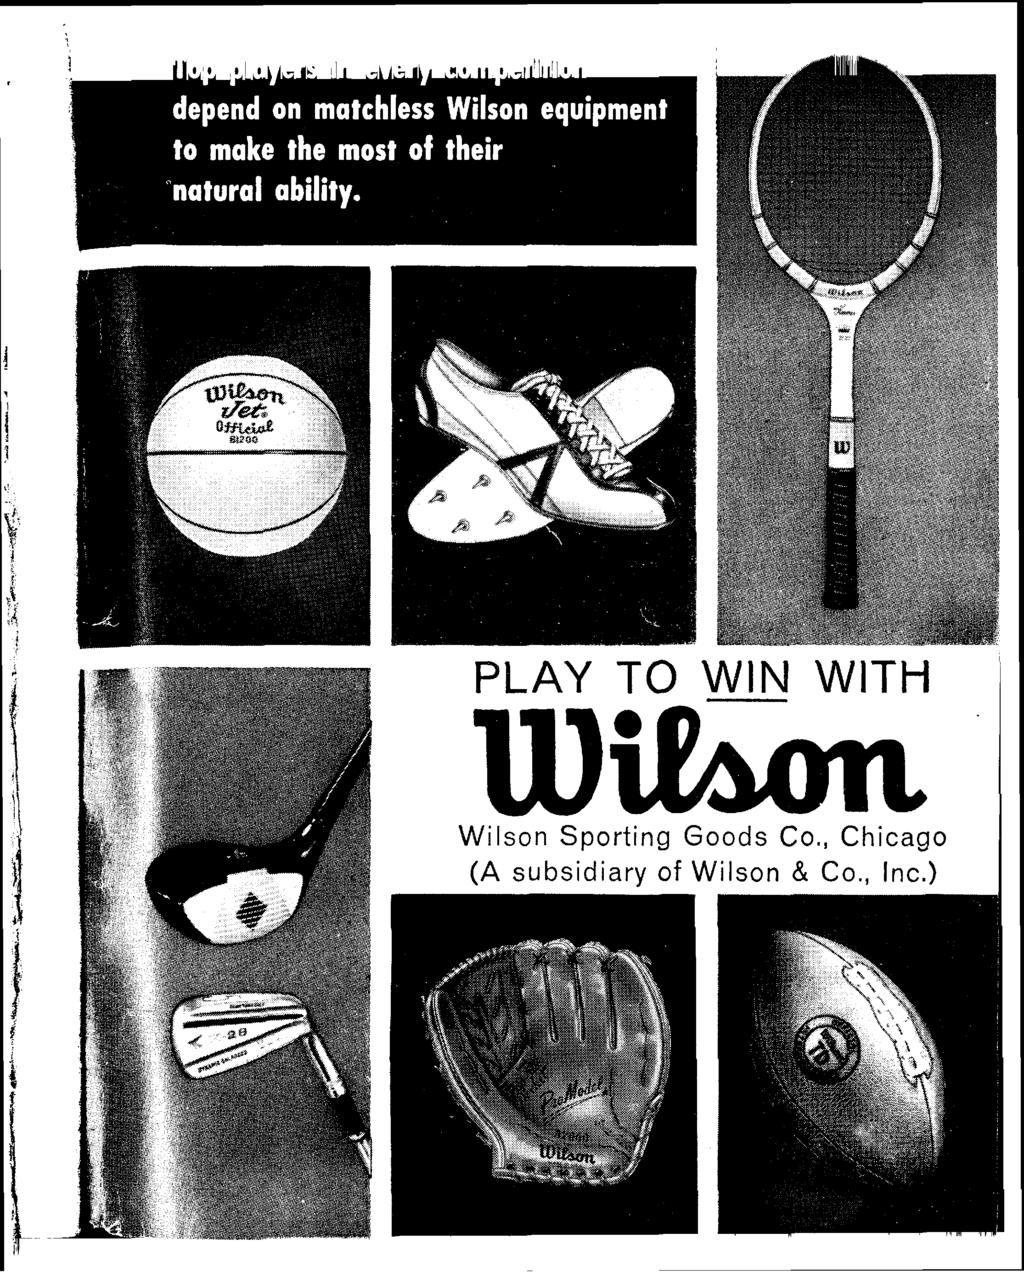 PLAY TO WIN WITH 1 Wilson Sporting Goods Co.